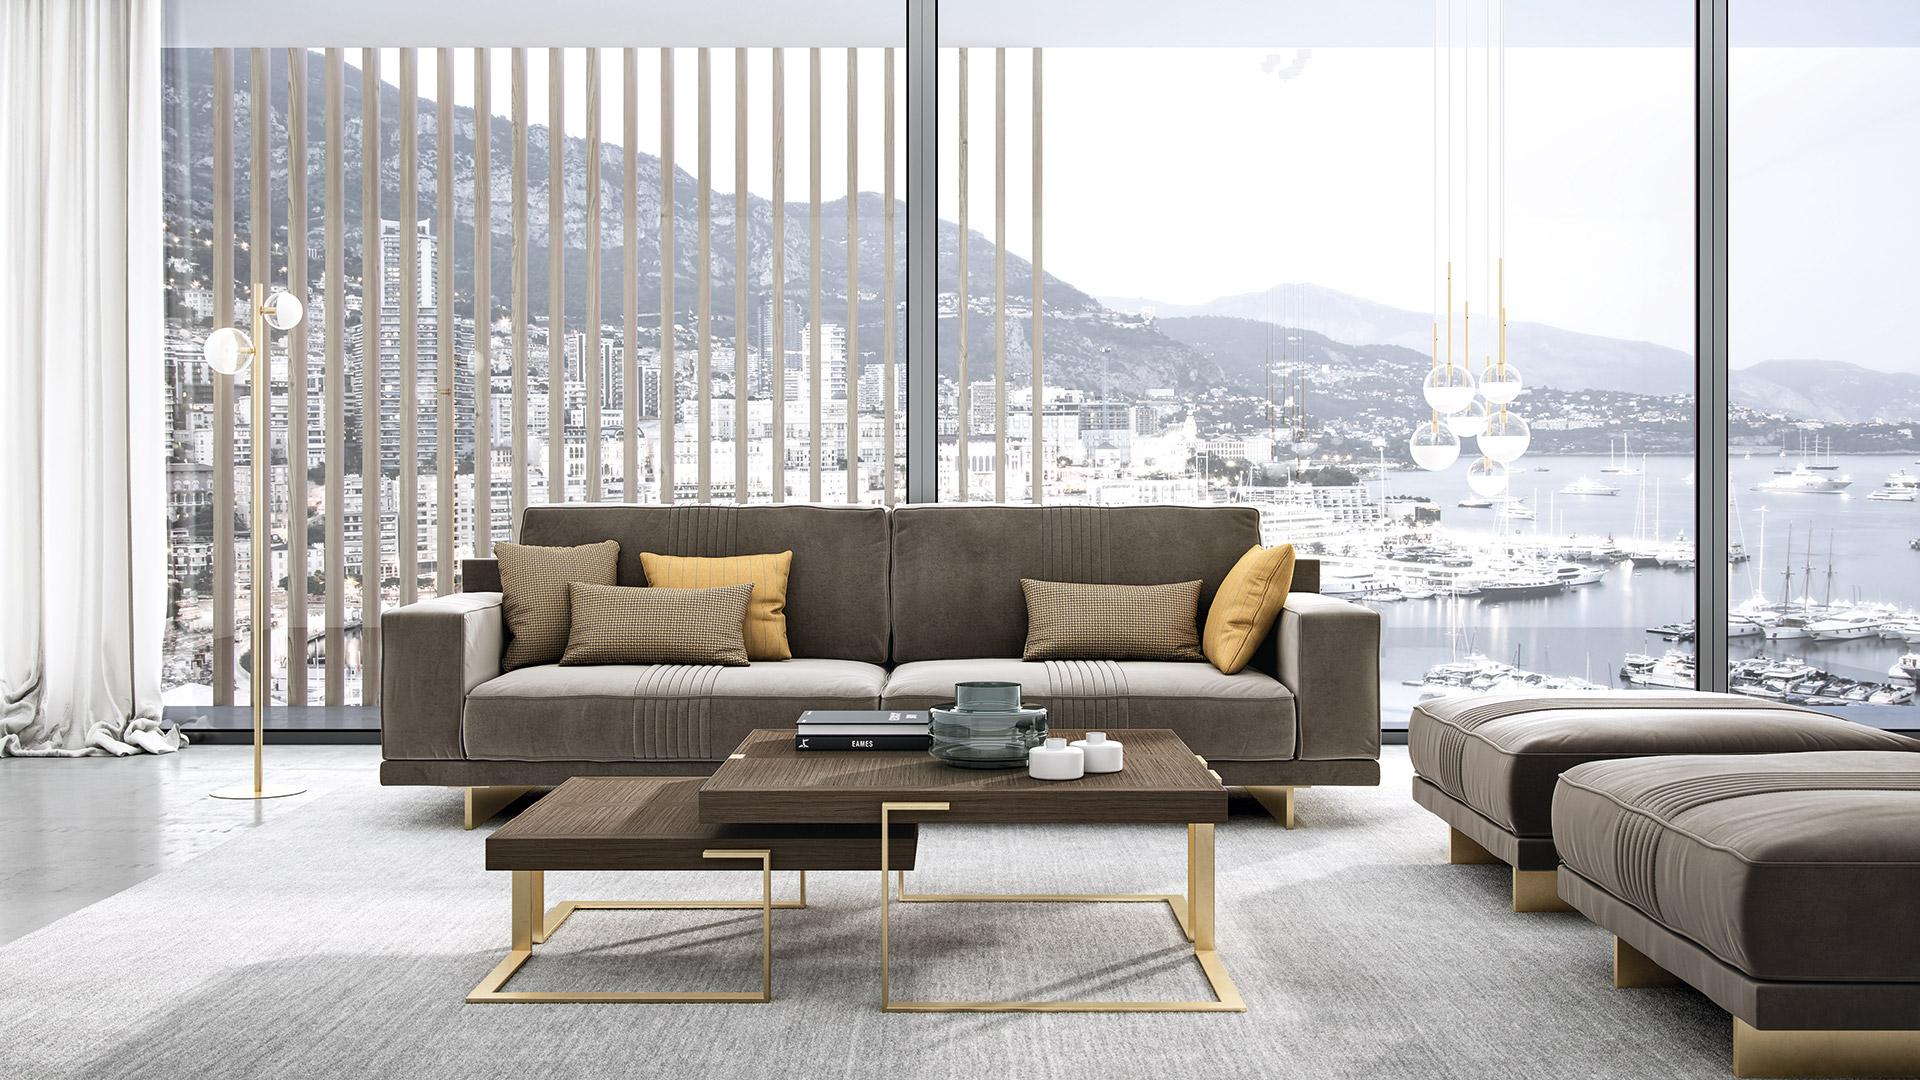 Armchair characterized by a soft backrest perfectly shaped that enhances the comfort.
The metal base is in gold finishing and improves the modern look of the sofa.
On the back and on the seating complete the design thanks to pipeline stitchings to